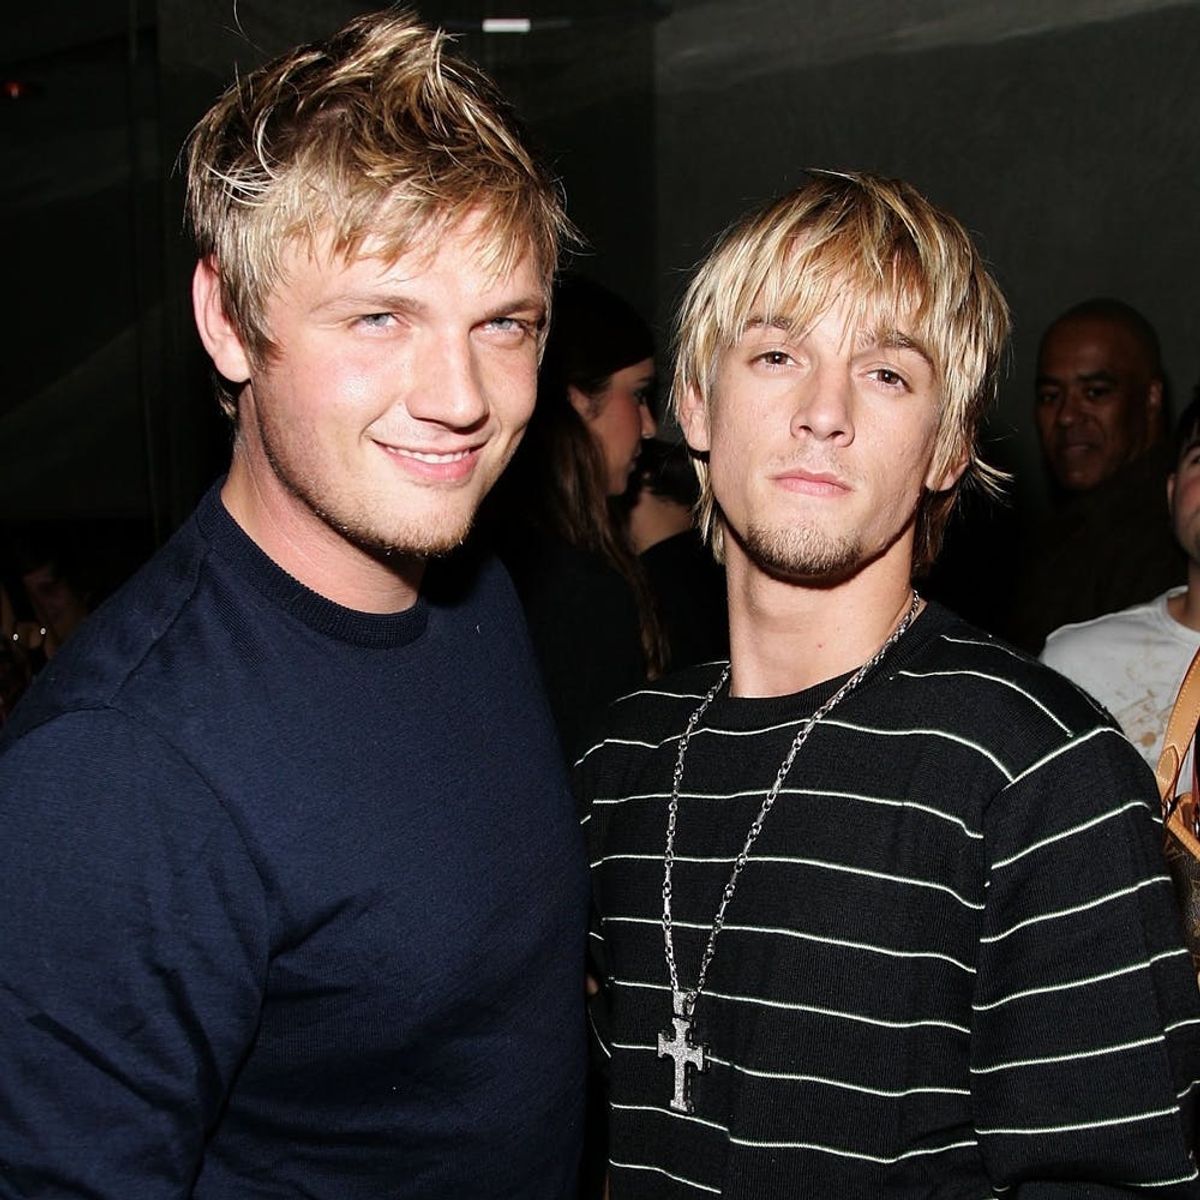 Aaron Carter Gets Emotional Over His Strained Relationship With Brother Nick